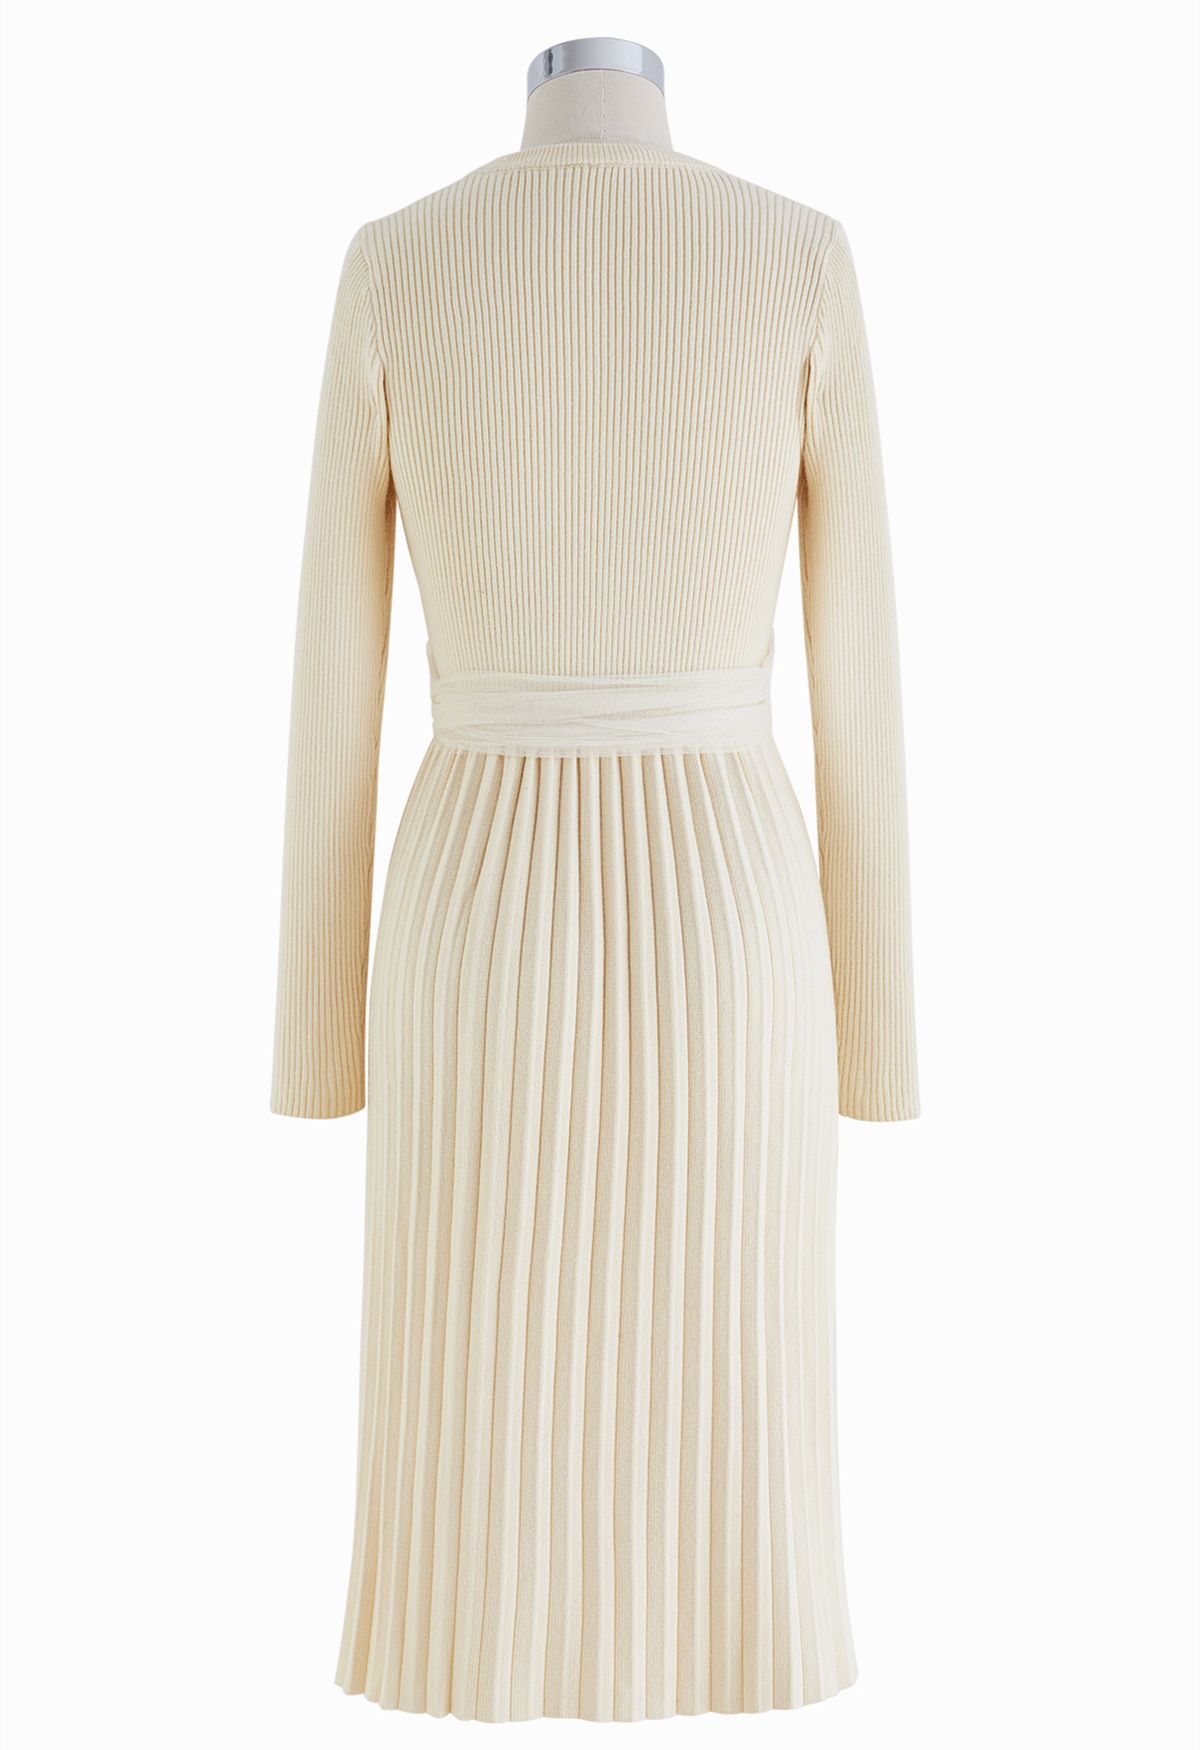 Self-Tie Mesh Bow Ribbed Knit Dress in Cream - Retro, Indie and Unique ...